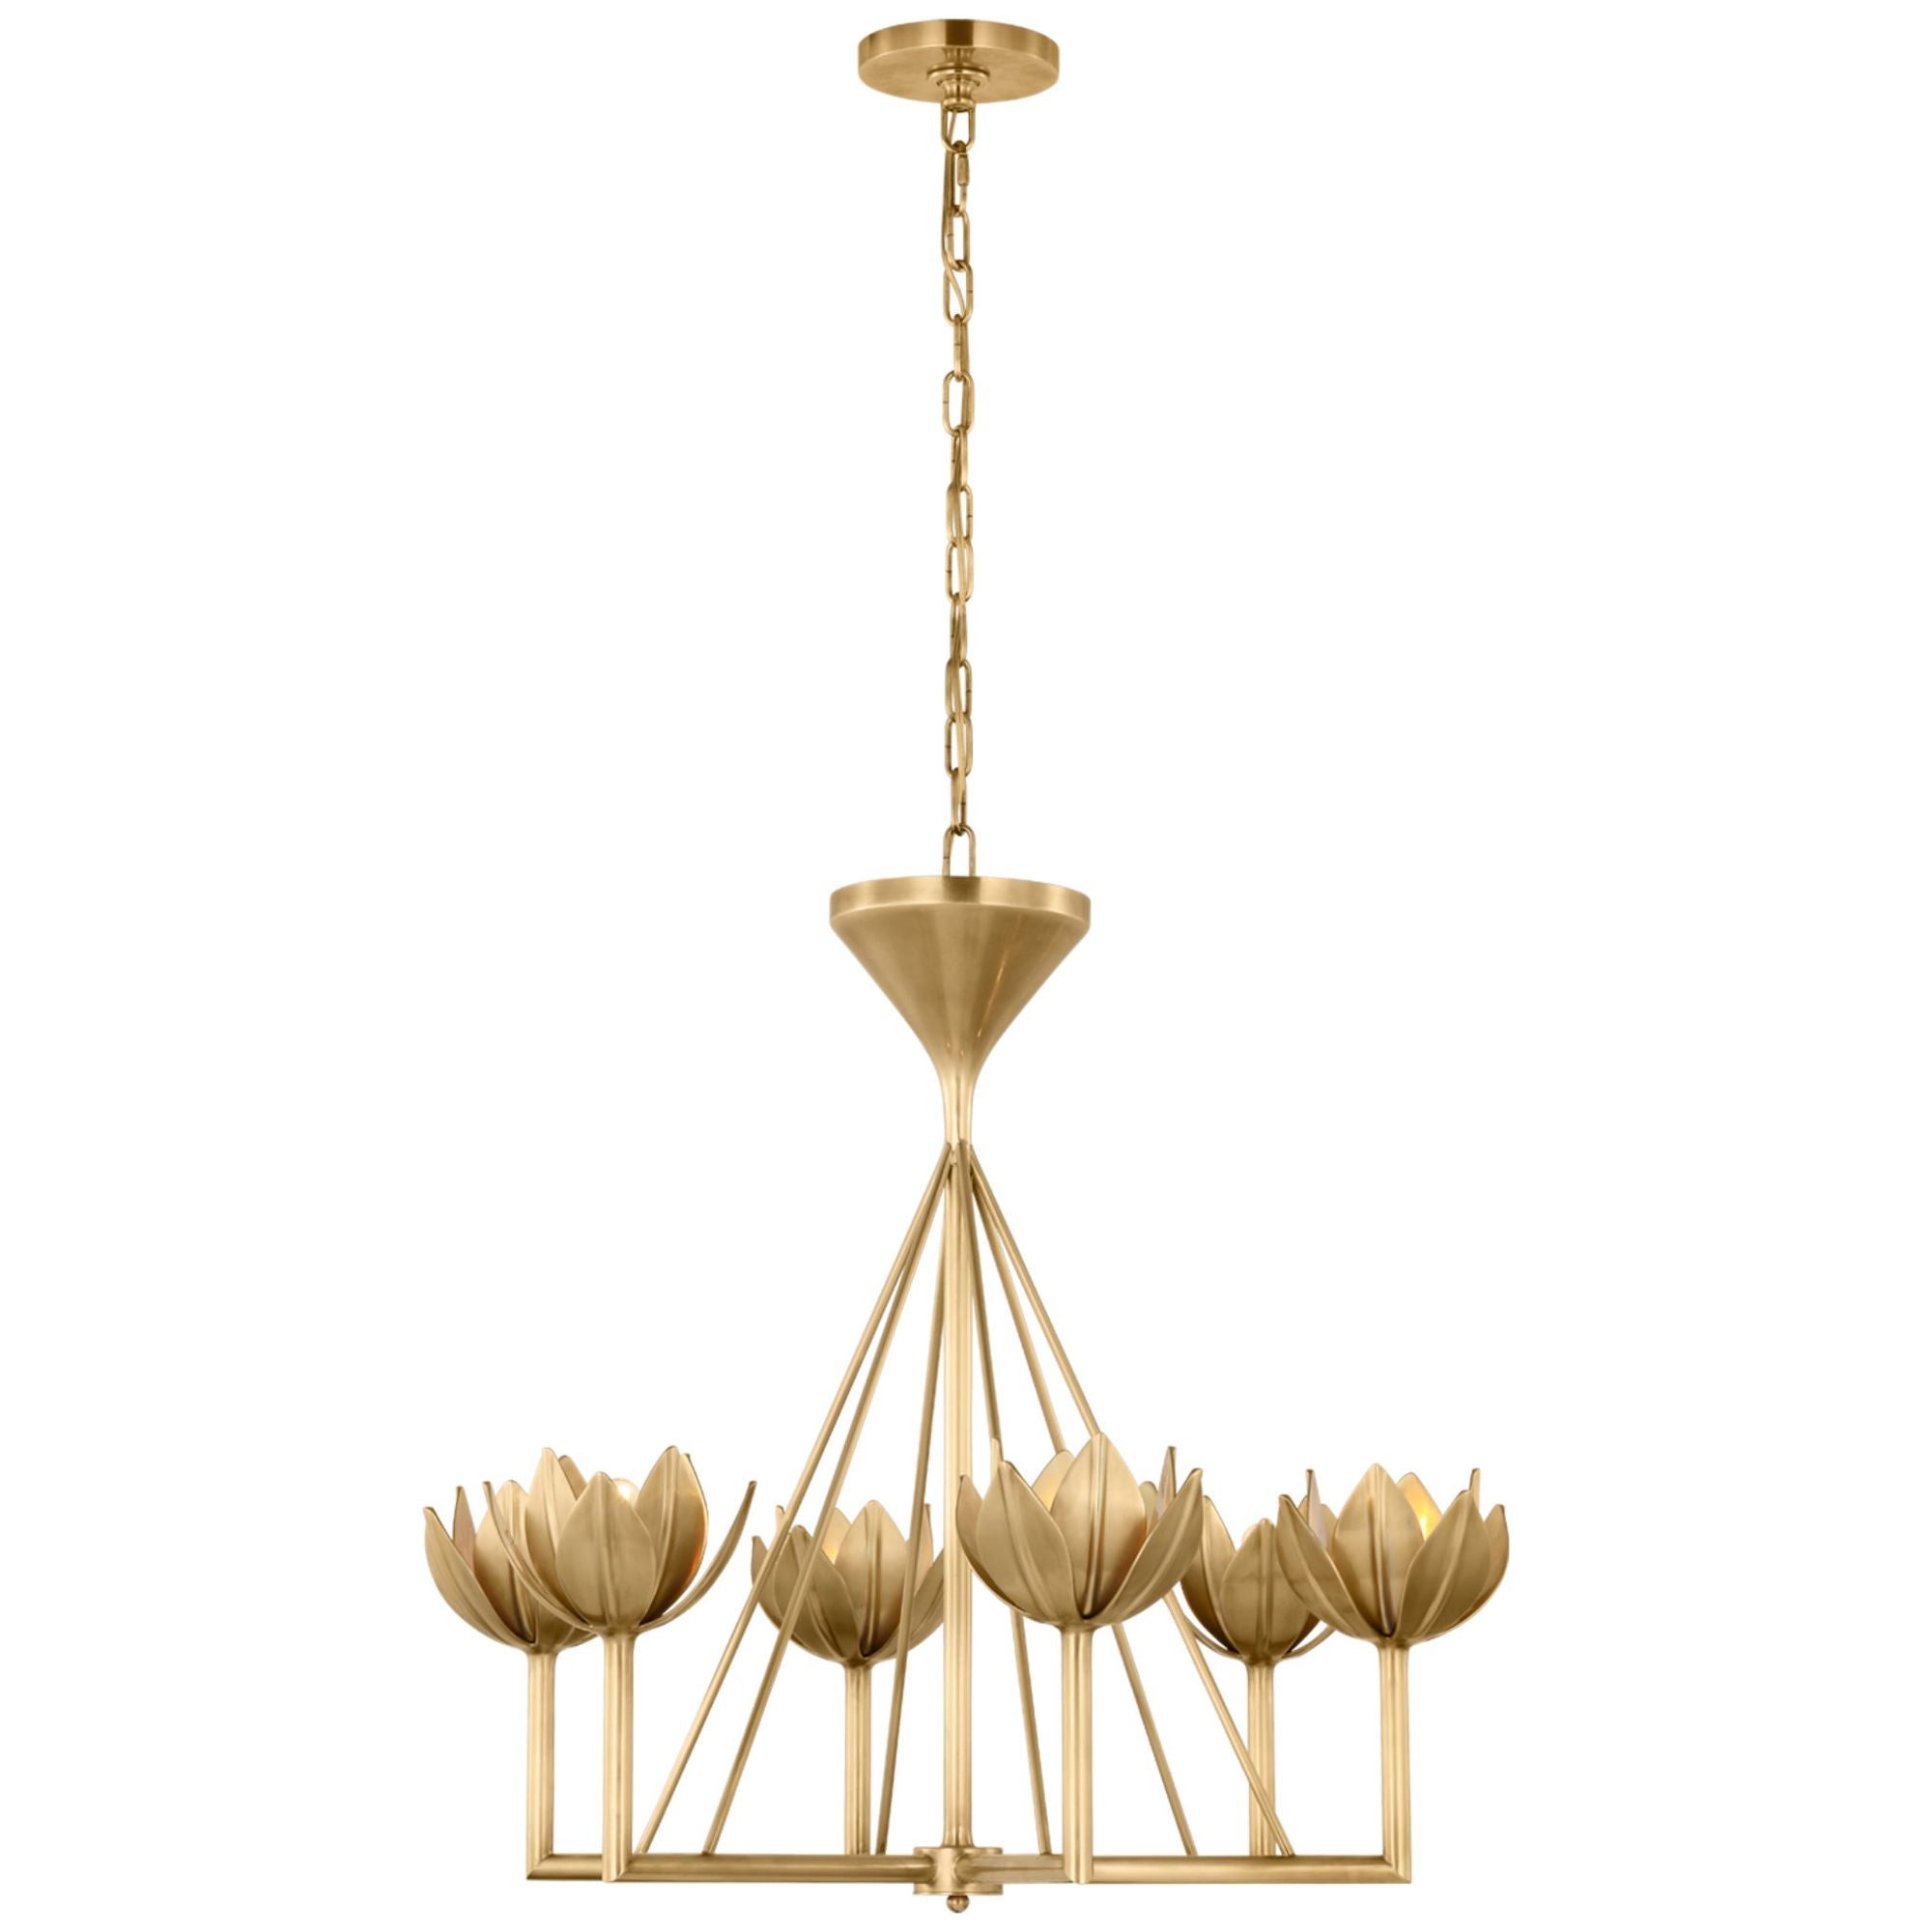 Julie Neill Alberto Small Low Ceiling Chandelier in Antique-Burnished Brass